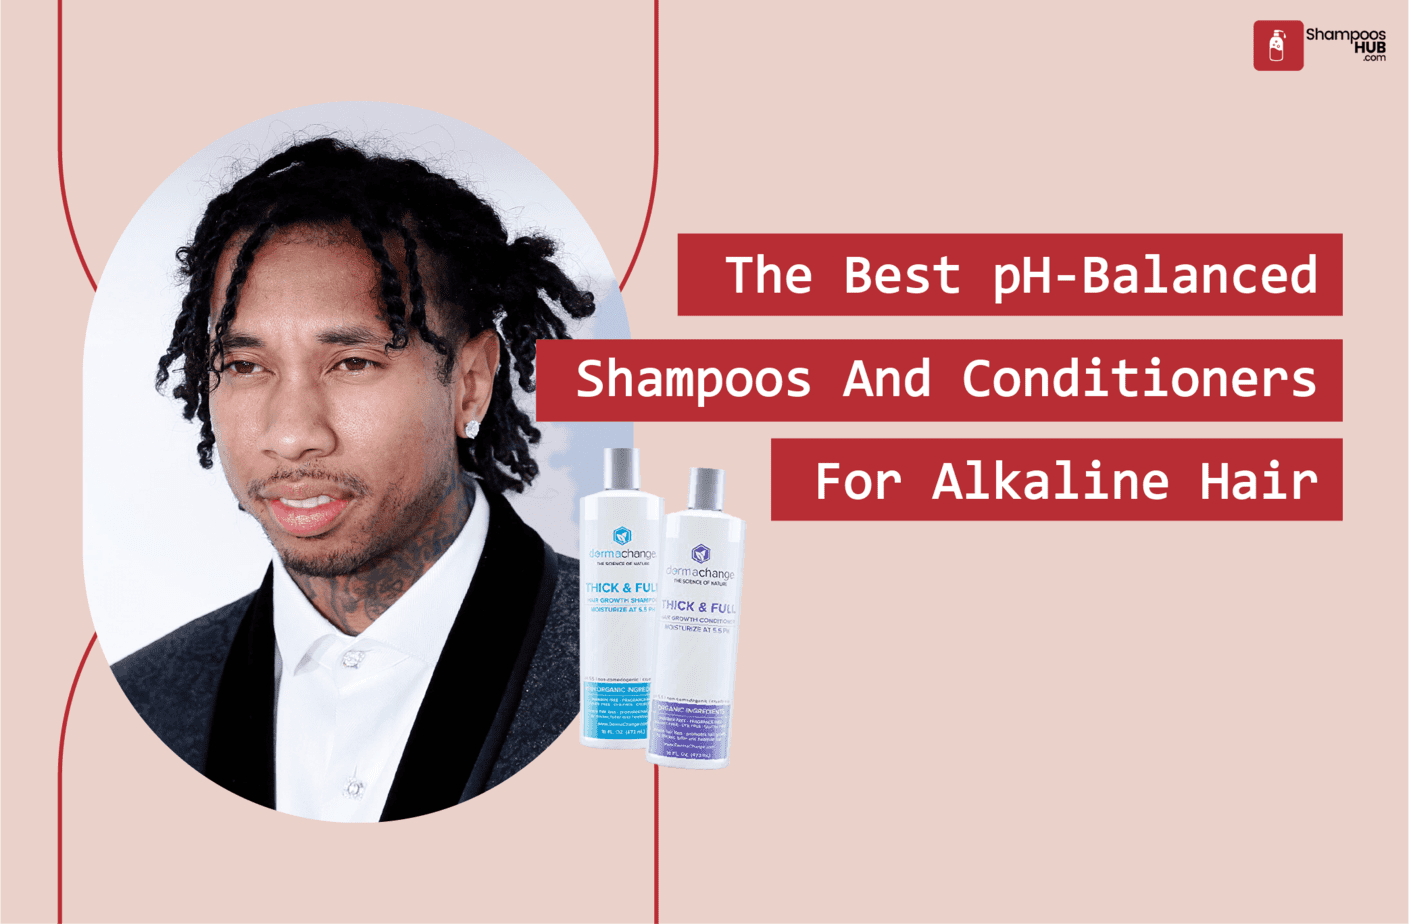 Best pH-Balanced Shampoos And Conditioners For Alkaline Hair